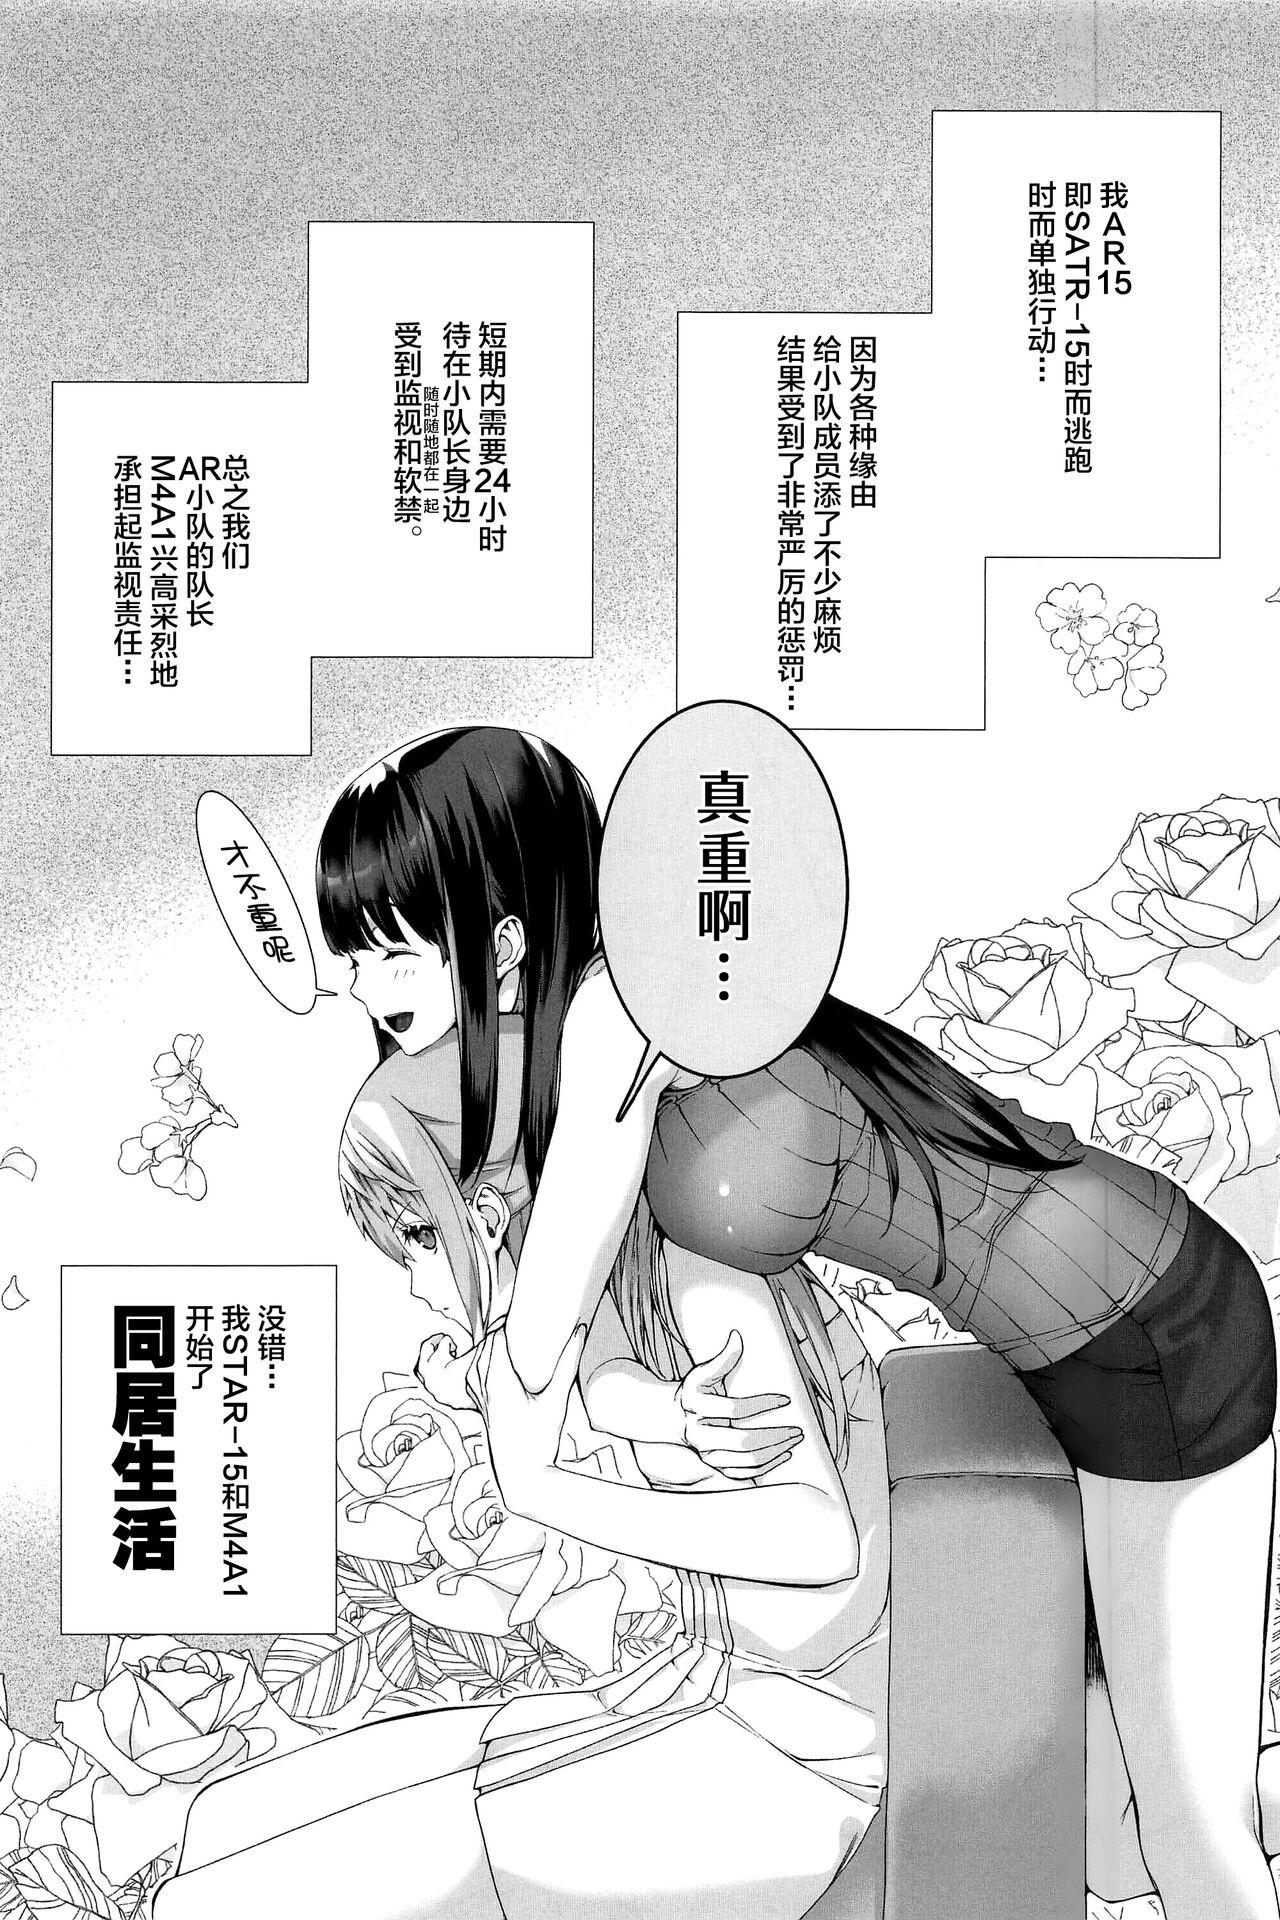 Fucking Sex STAR15&M4A1 - Girls frontline Maid - Page 3